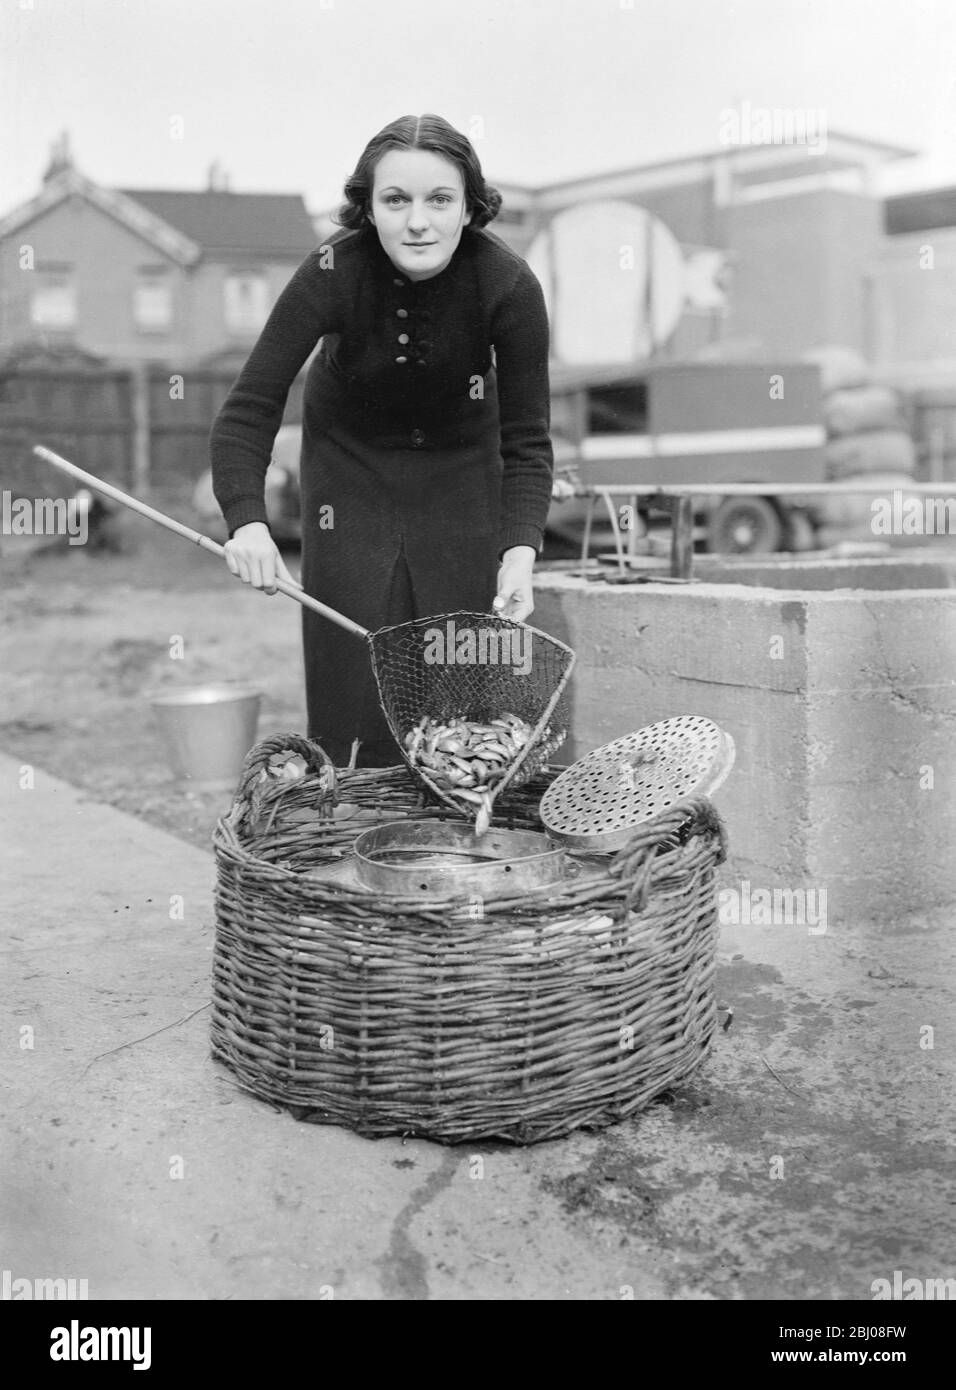 Keeping England on the goldfish standard . - - Thousands imported from Italy before sanctions . - - Transferring fresh arrivals to a huge tank at an Alperton fisheries . - - 18 October 1935 Stock Photo